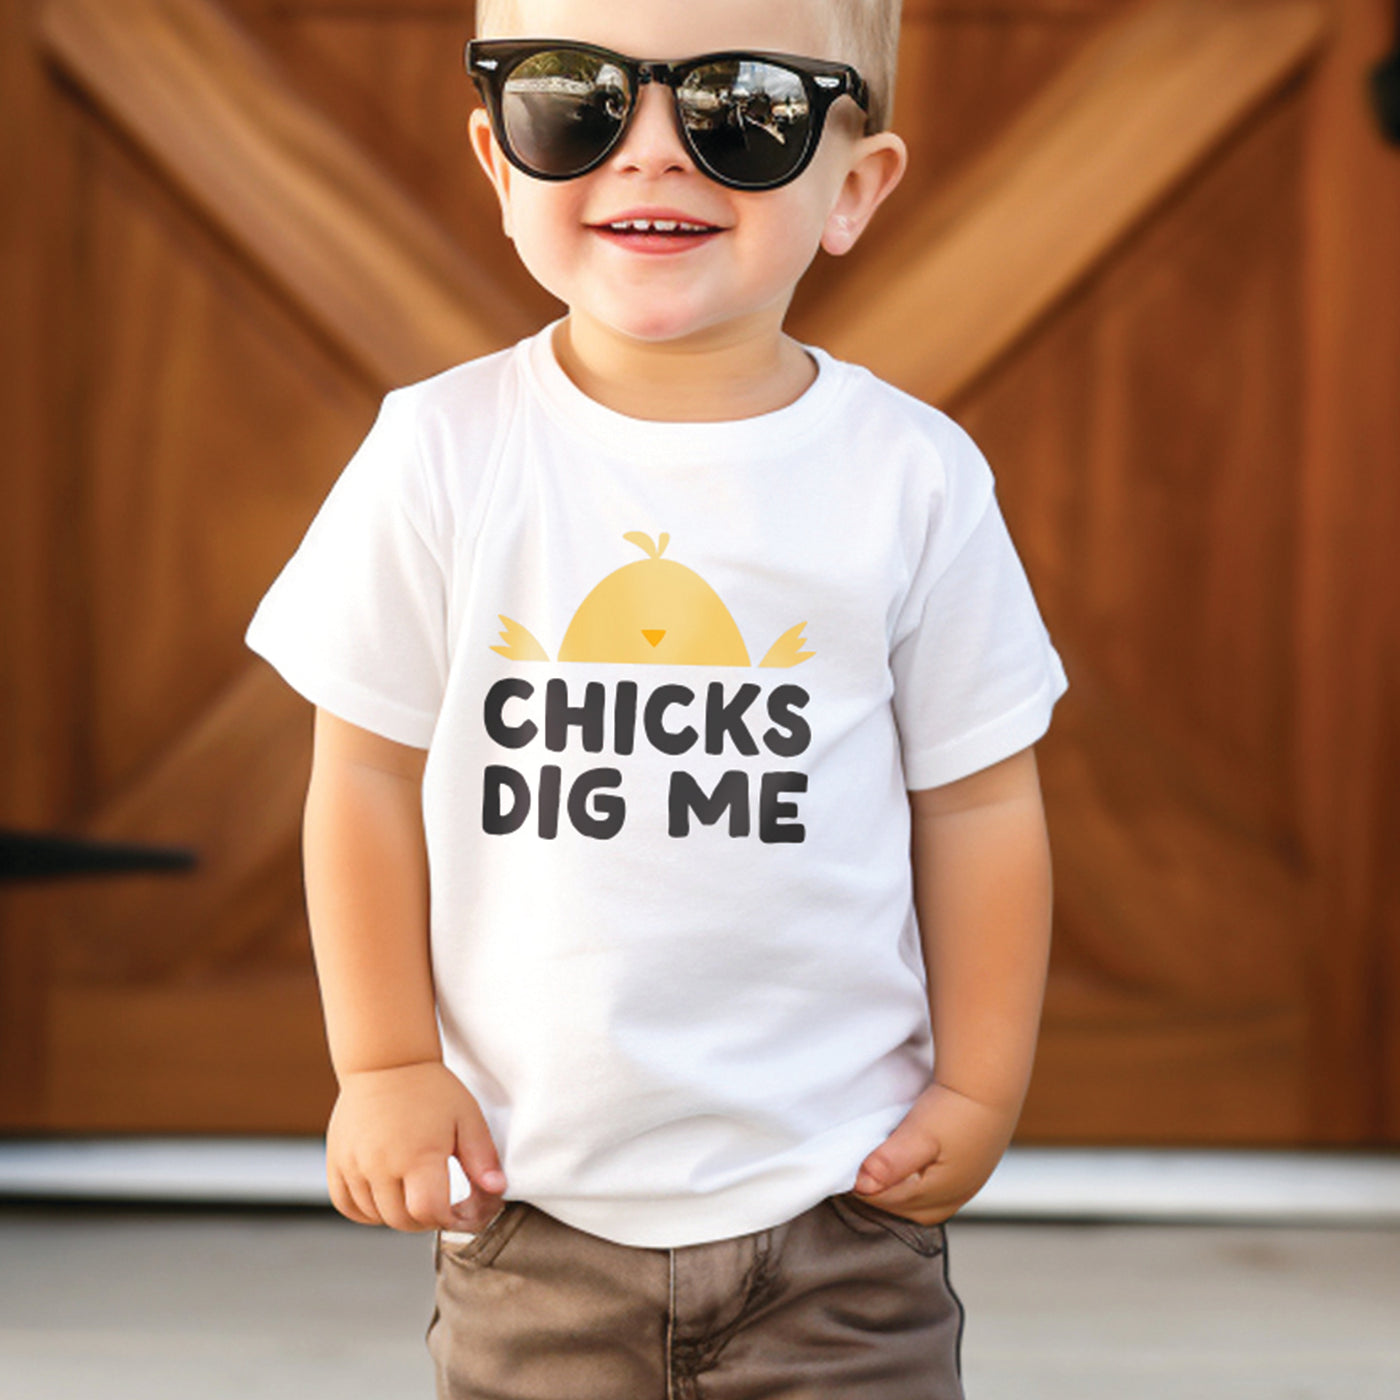 Little boy wearing white shirt with yellow orange and black CHICKS DIG ME baby chicken print